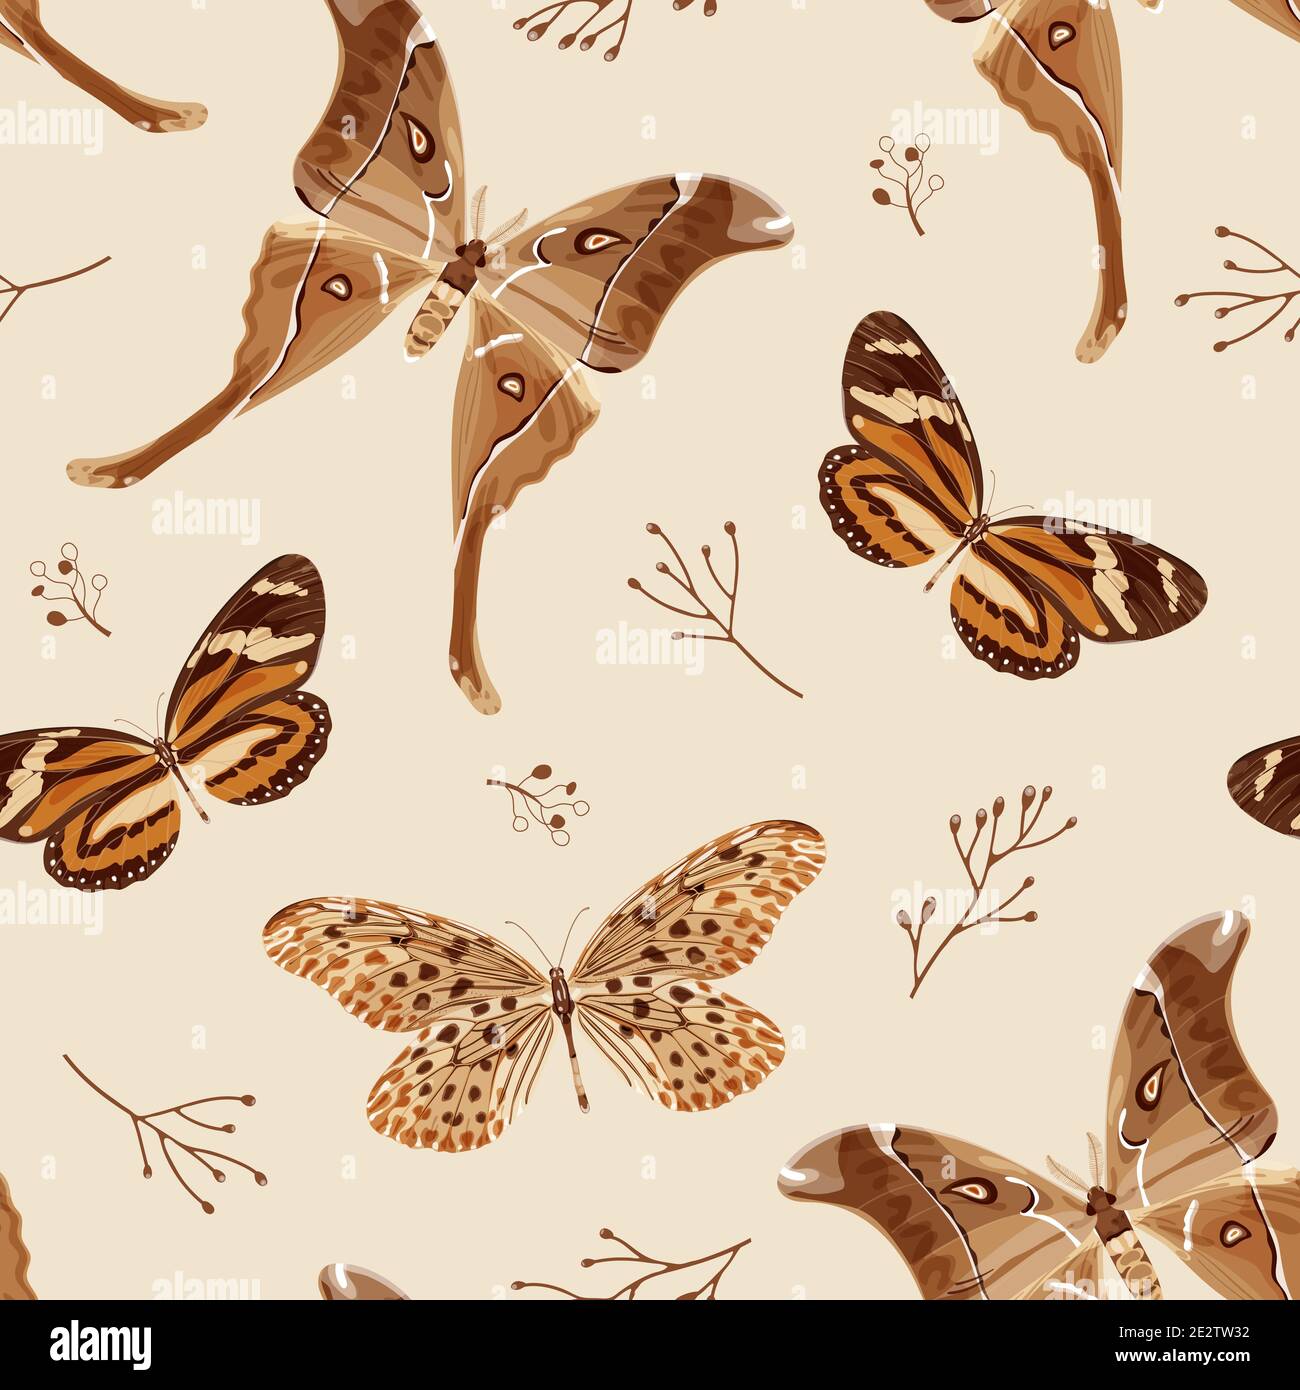 Seamless pattern with butterflies and moths in brown palette. The moth is a mystical symbol and talisman. Stock vector illustration. Stock Vector